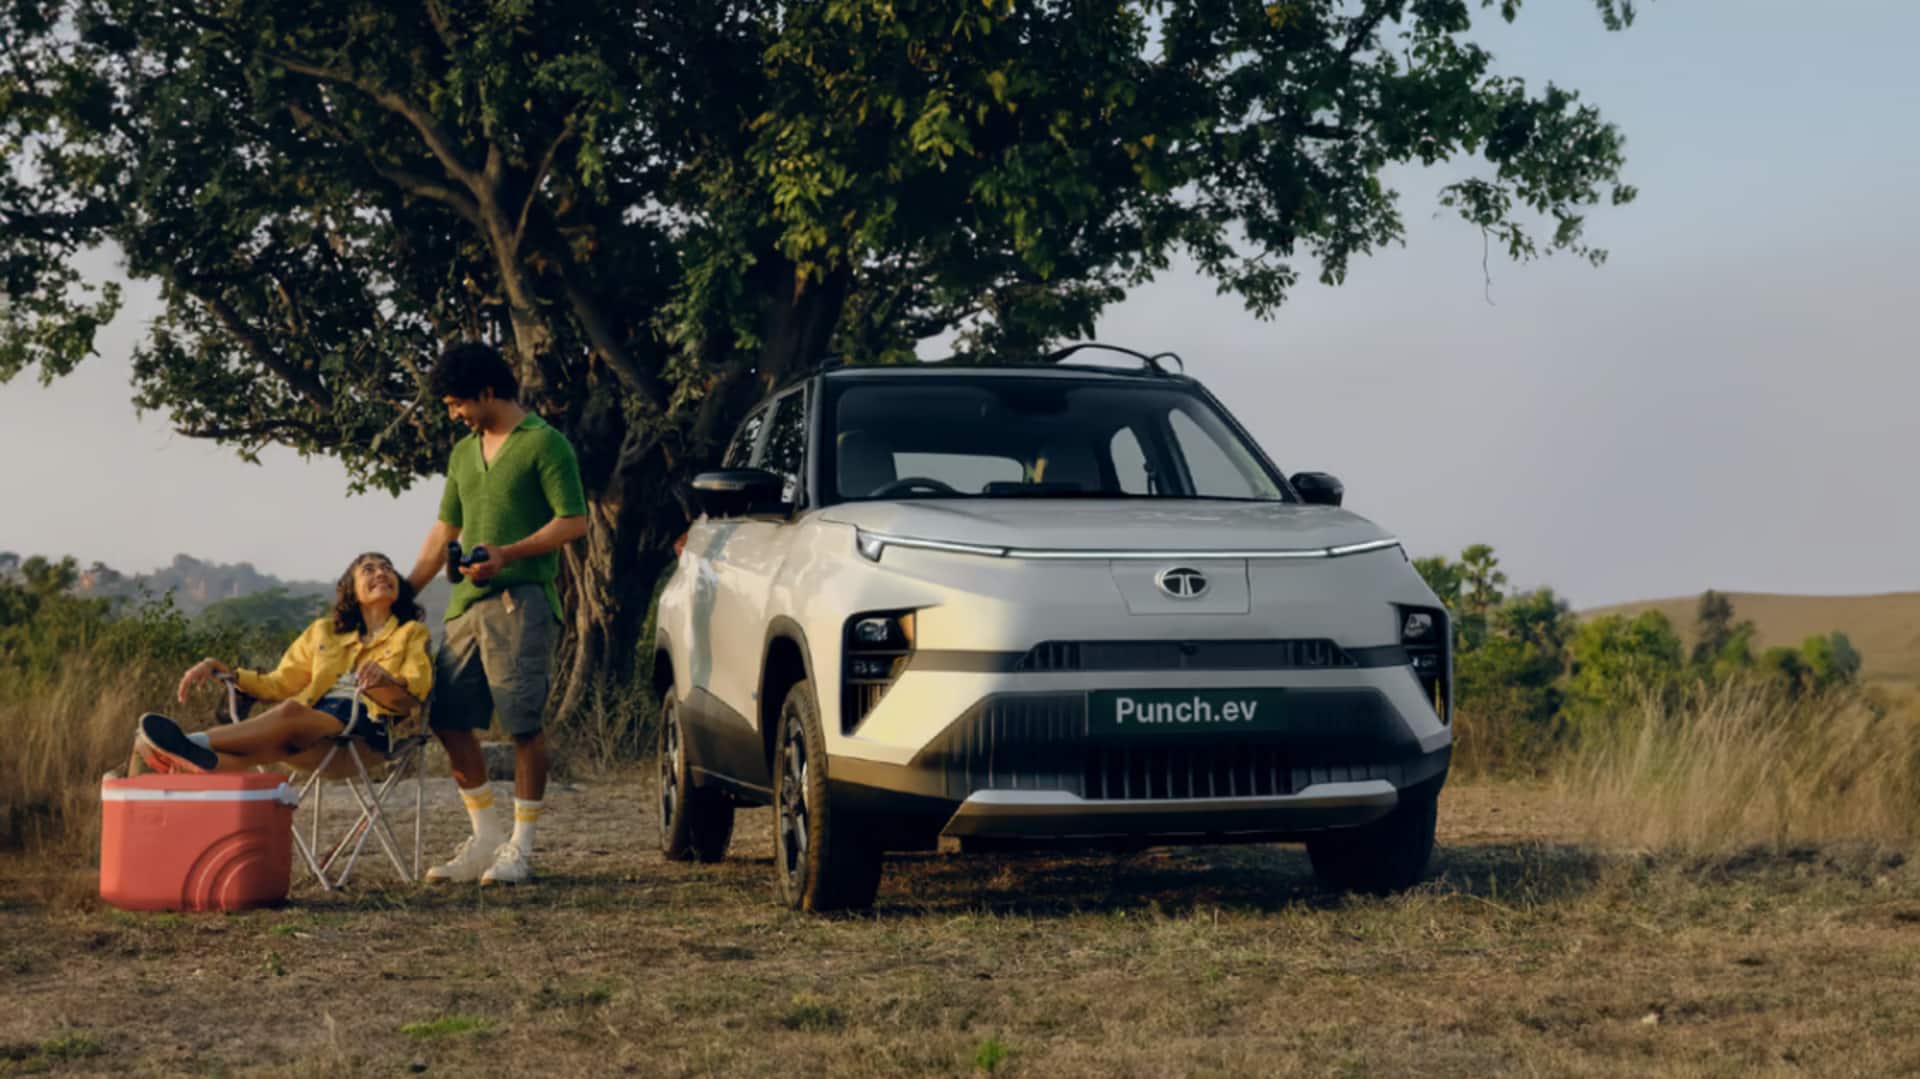 Tata Punch.ev launched in India at Rs. 11 lakh